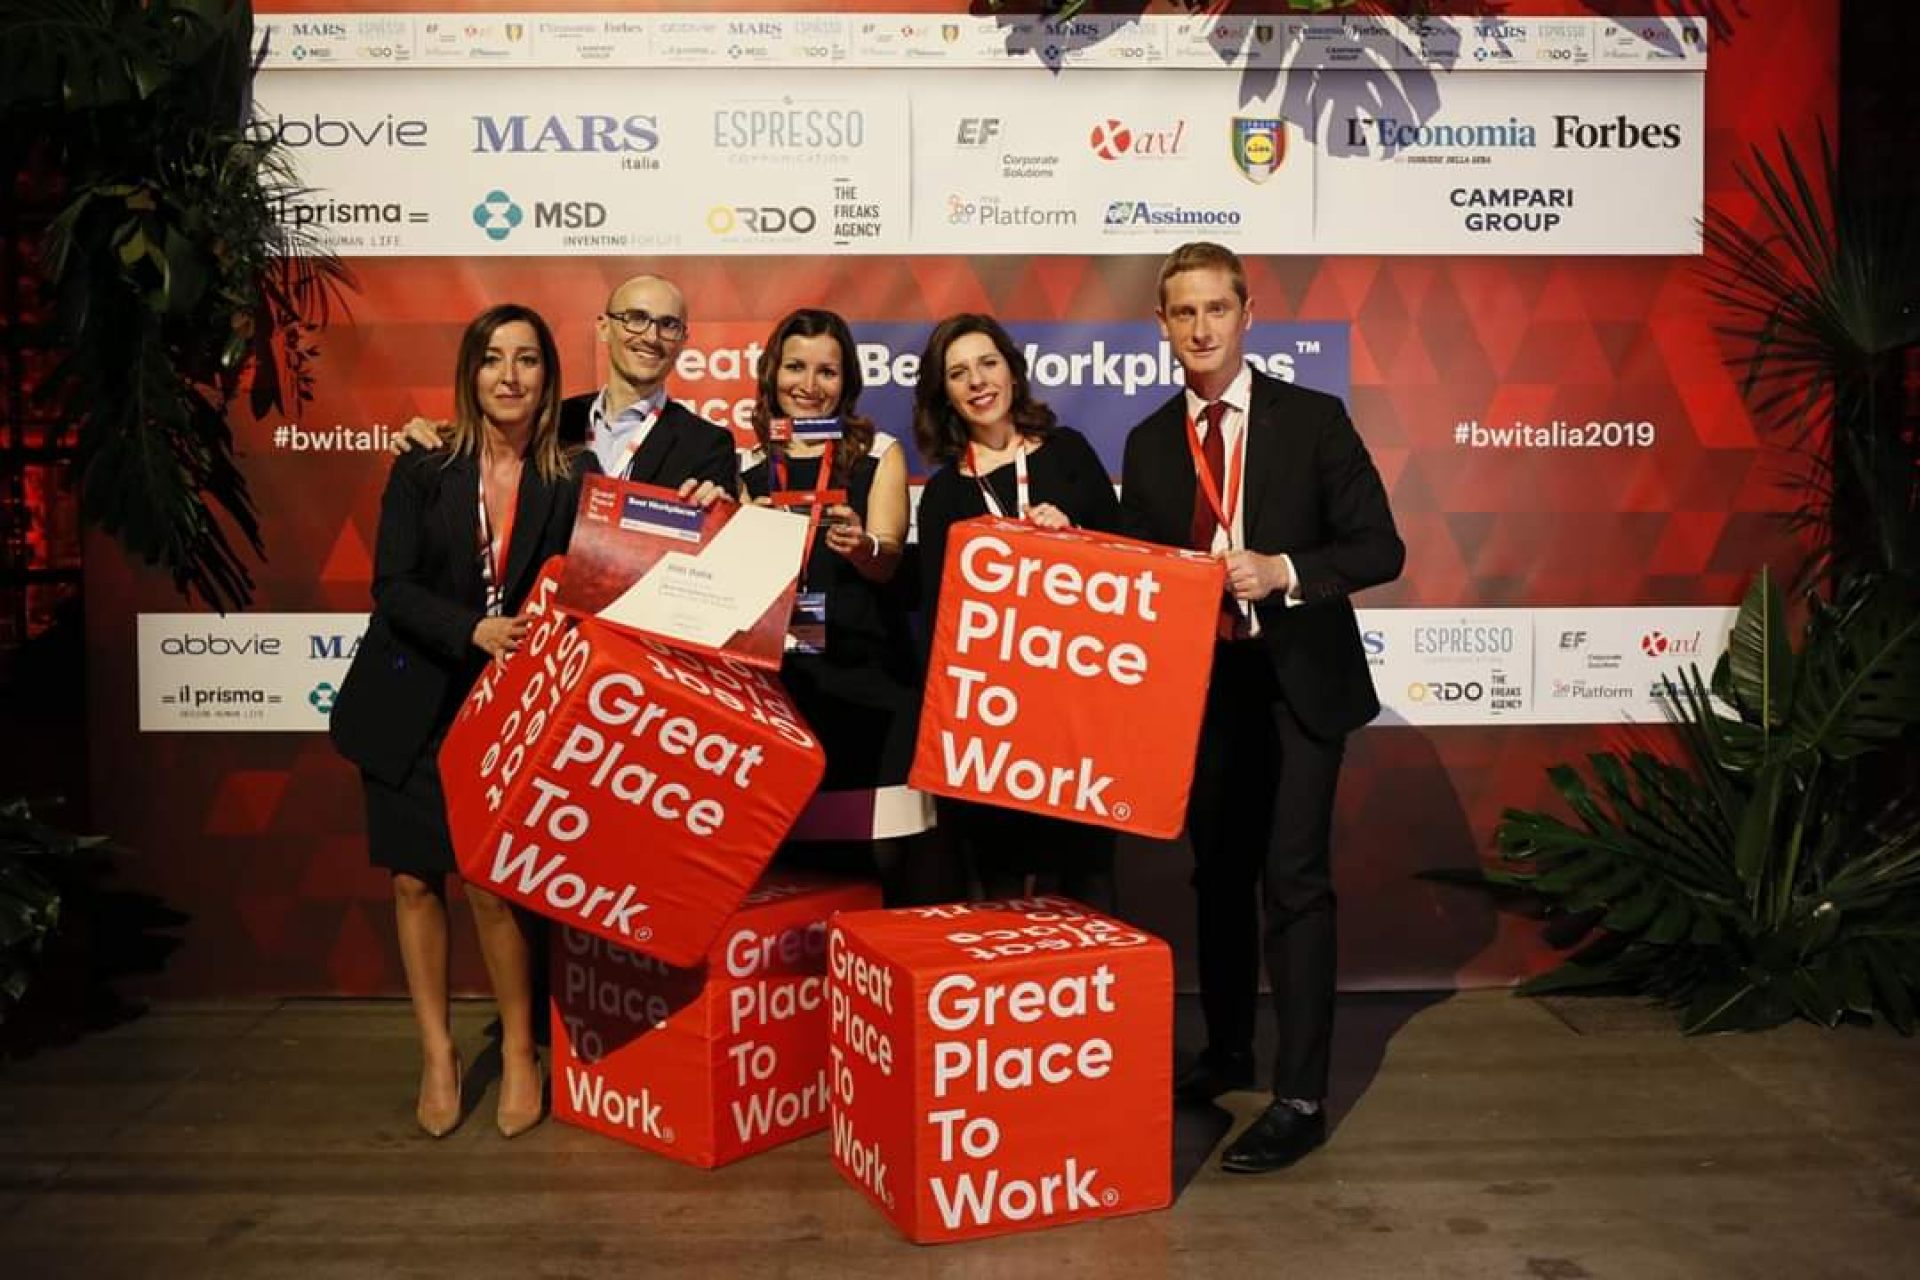 Great Place to Work 2019